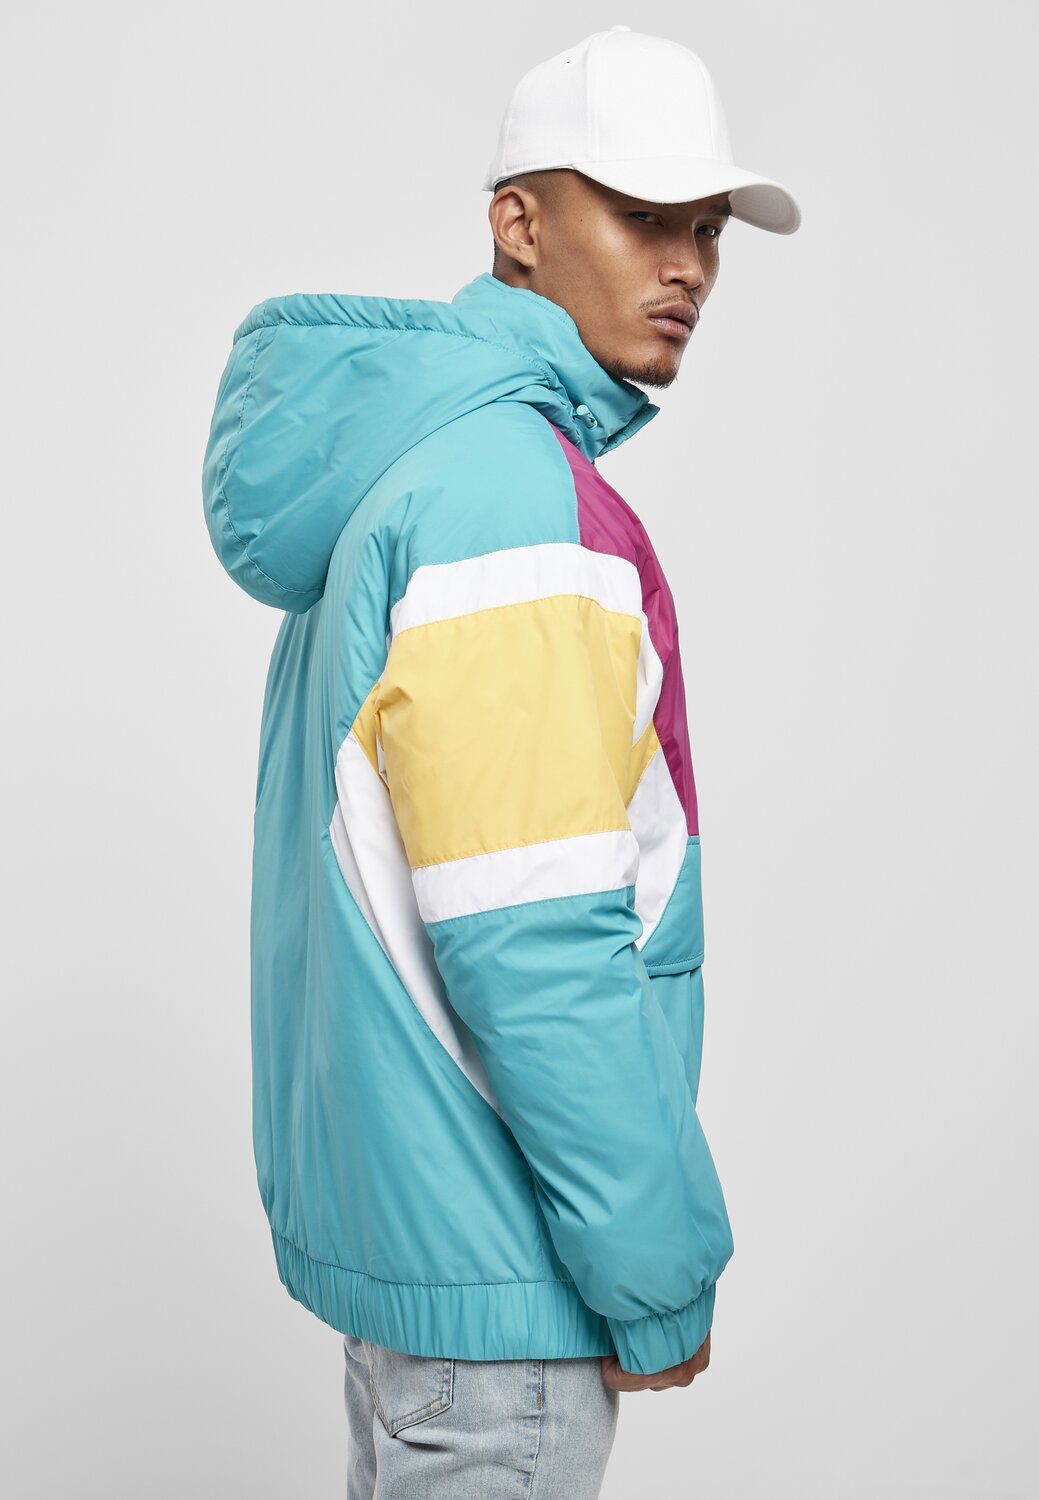 MAXISCOOT | Starter blue/pink/yellow/white turquoise jacket